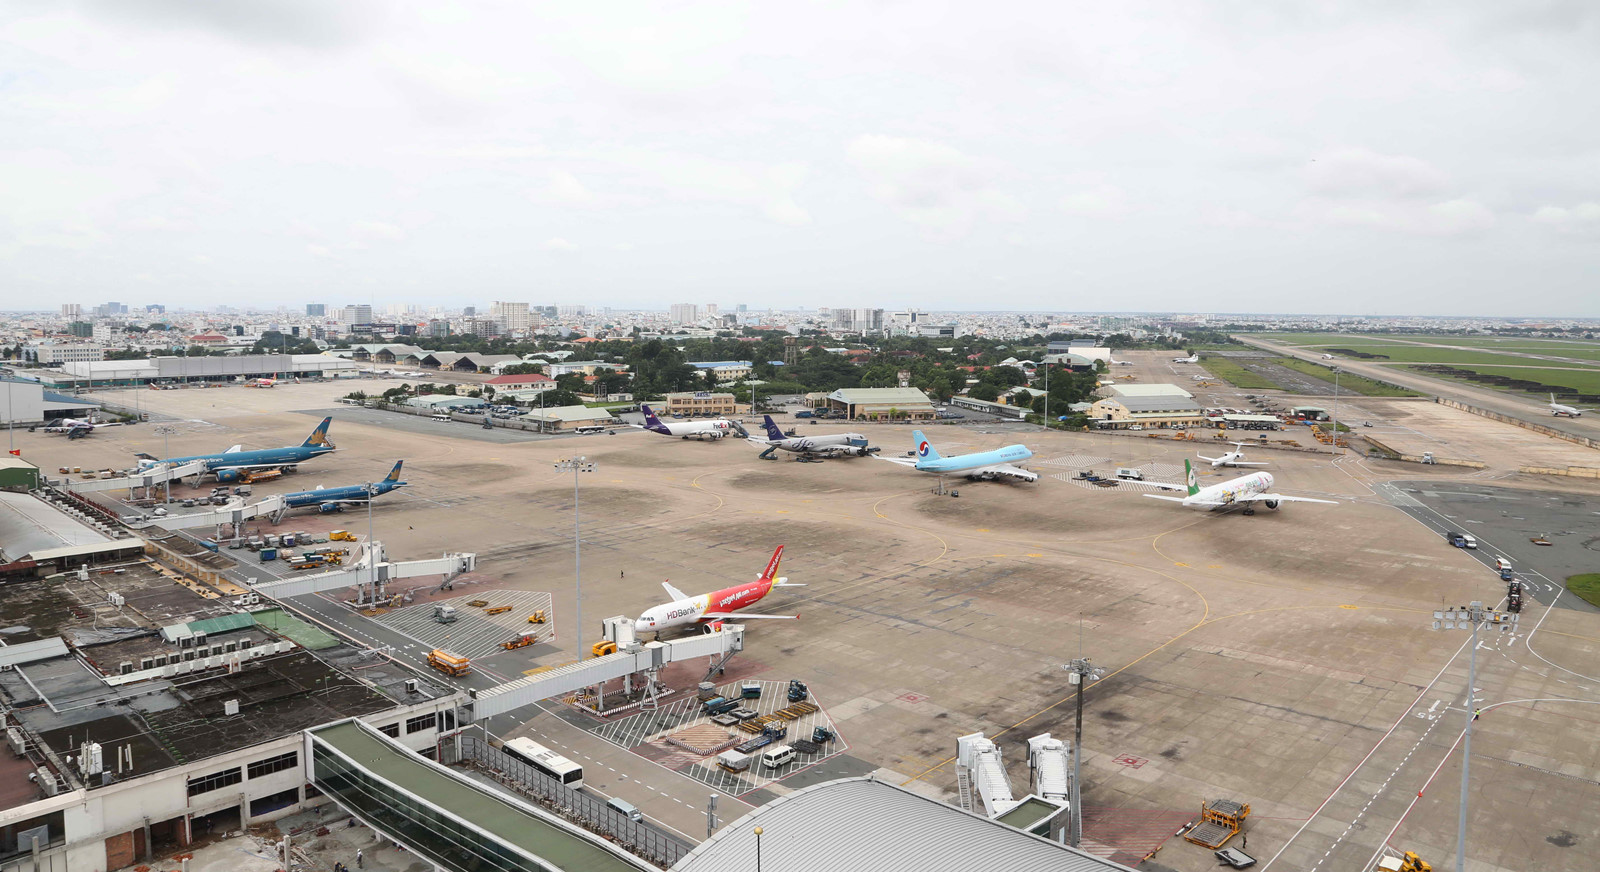 A section of Tan Son Nhat airport in HCMC. (Photo: Vietnambiz)